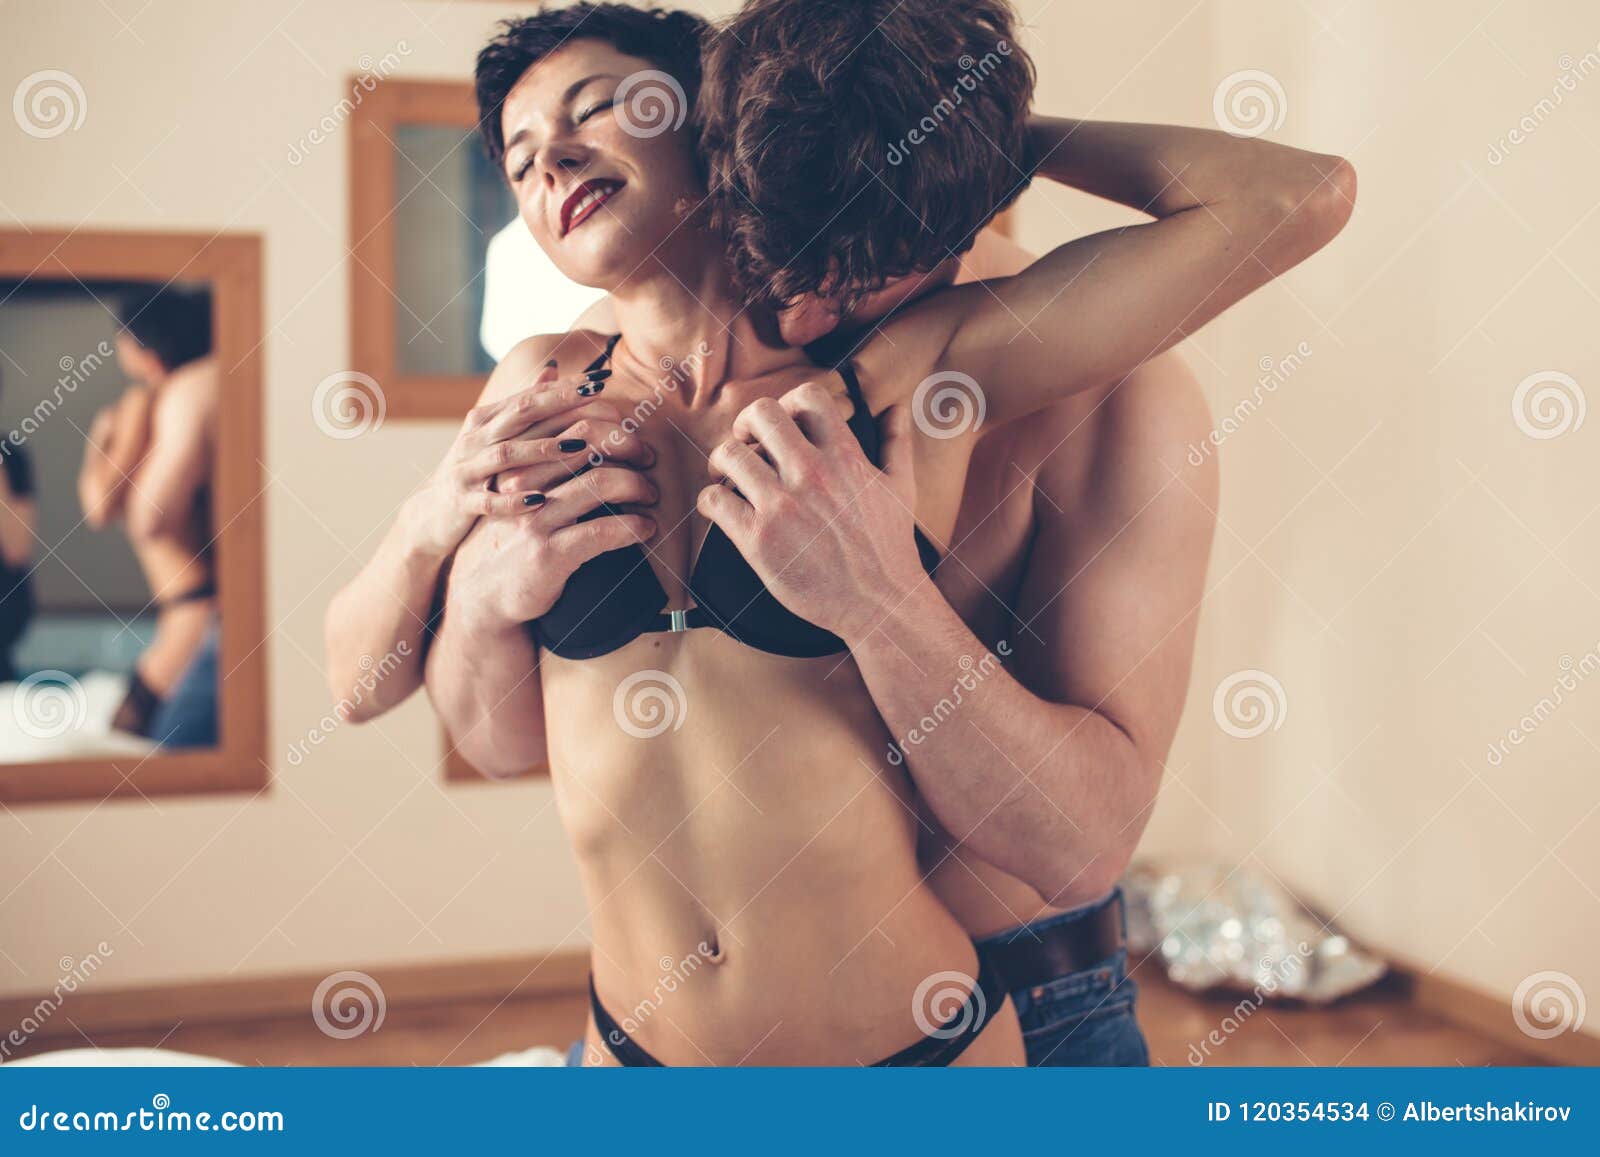 Hot Attractive Lovers Having Sex in Hotel picture